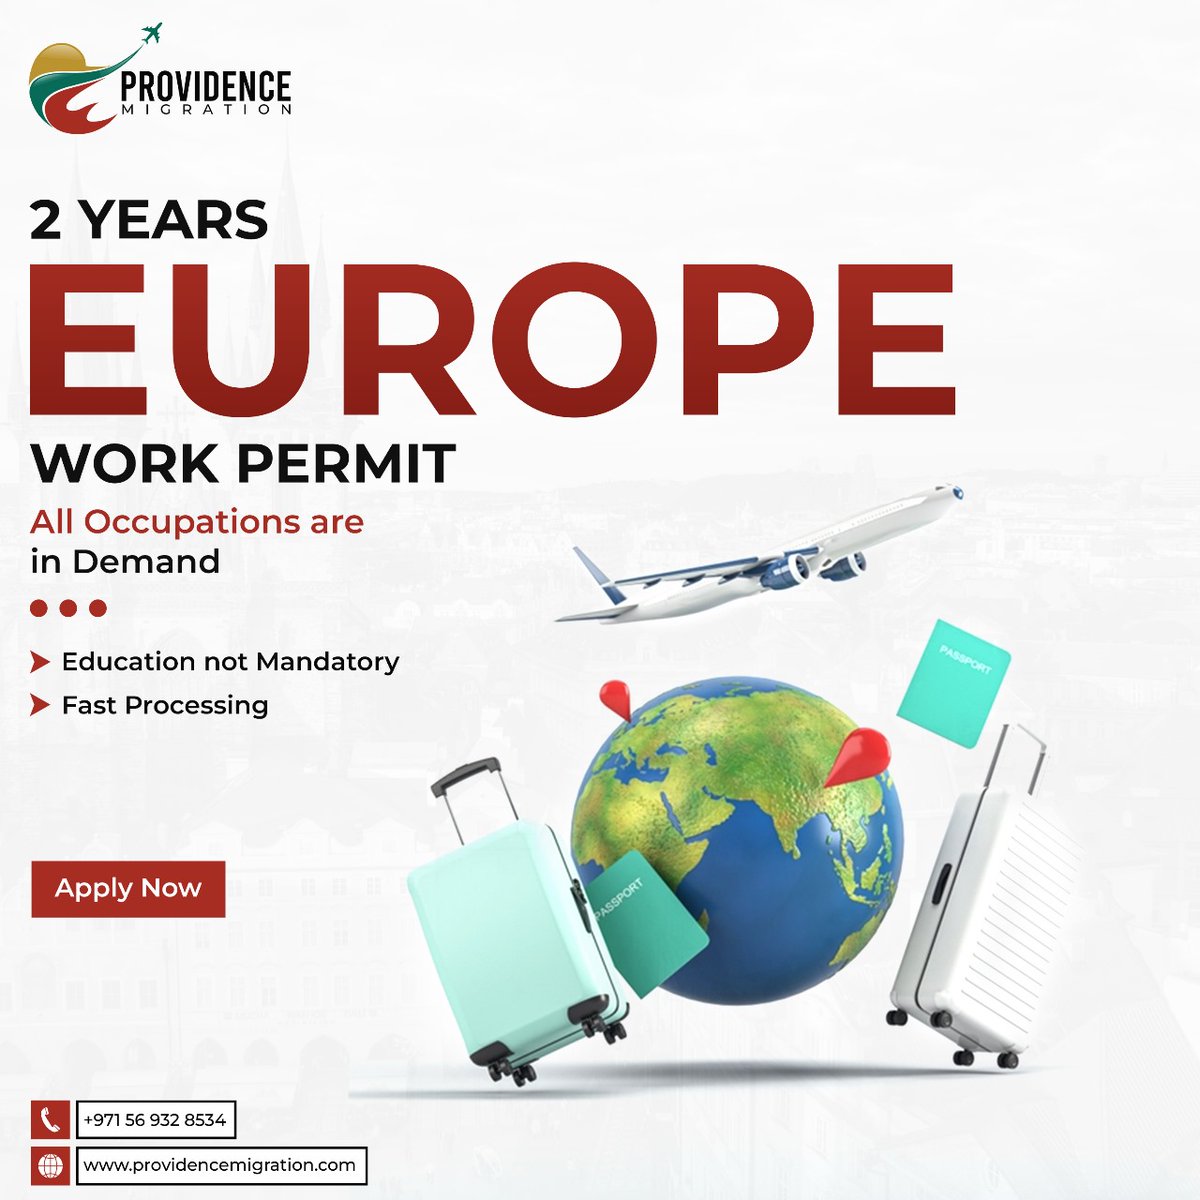 🌍✈️ Ready to start on a European adventure? Secure your future with a 2 years Europe work permit! 📜👷 All occupations are in demand - no matter your expertise. 🚀📝 Education not mandatory - your skills speak volumes.
#providence #europework #live #europeworkpermit #migration